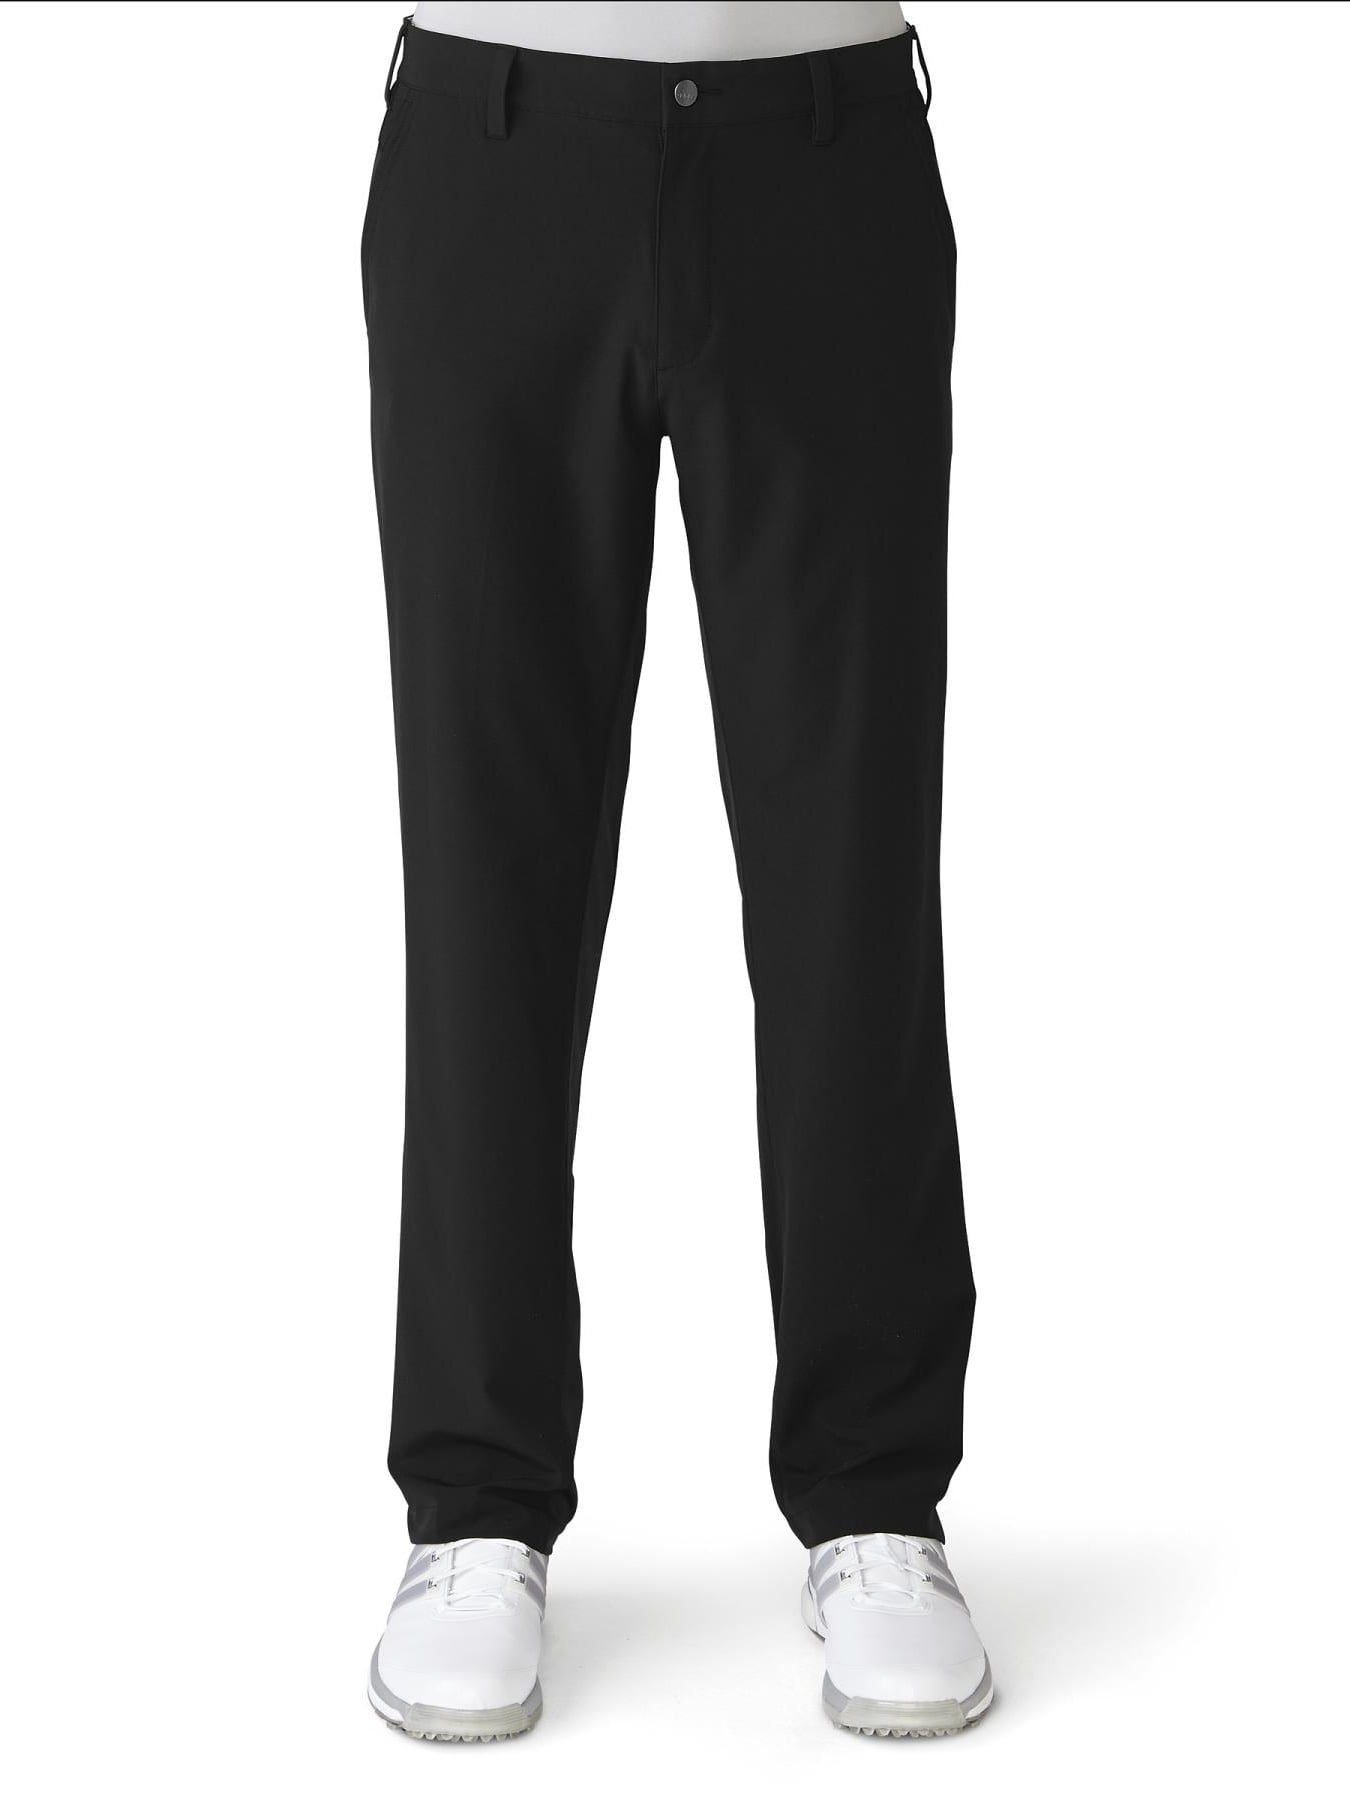 2016 Adidas Climacool Ultimate Airflow Mens Performance Golf Trousers - Walmart.com